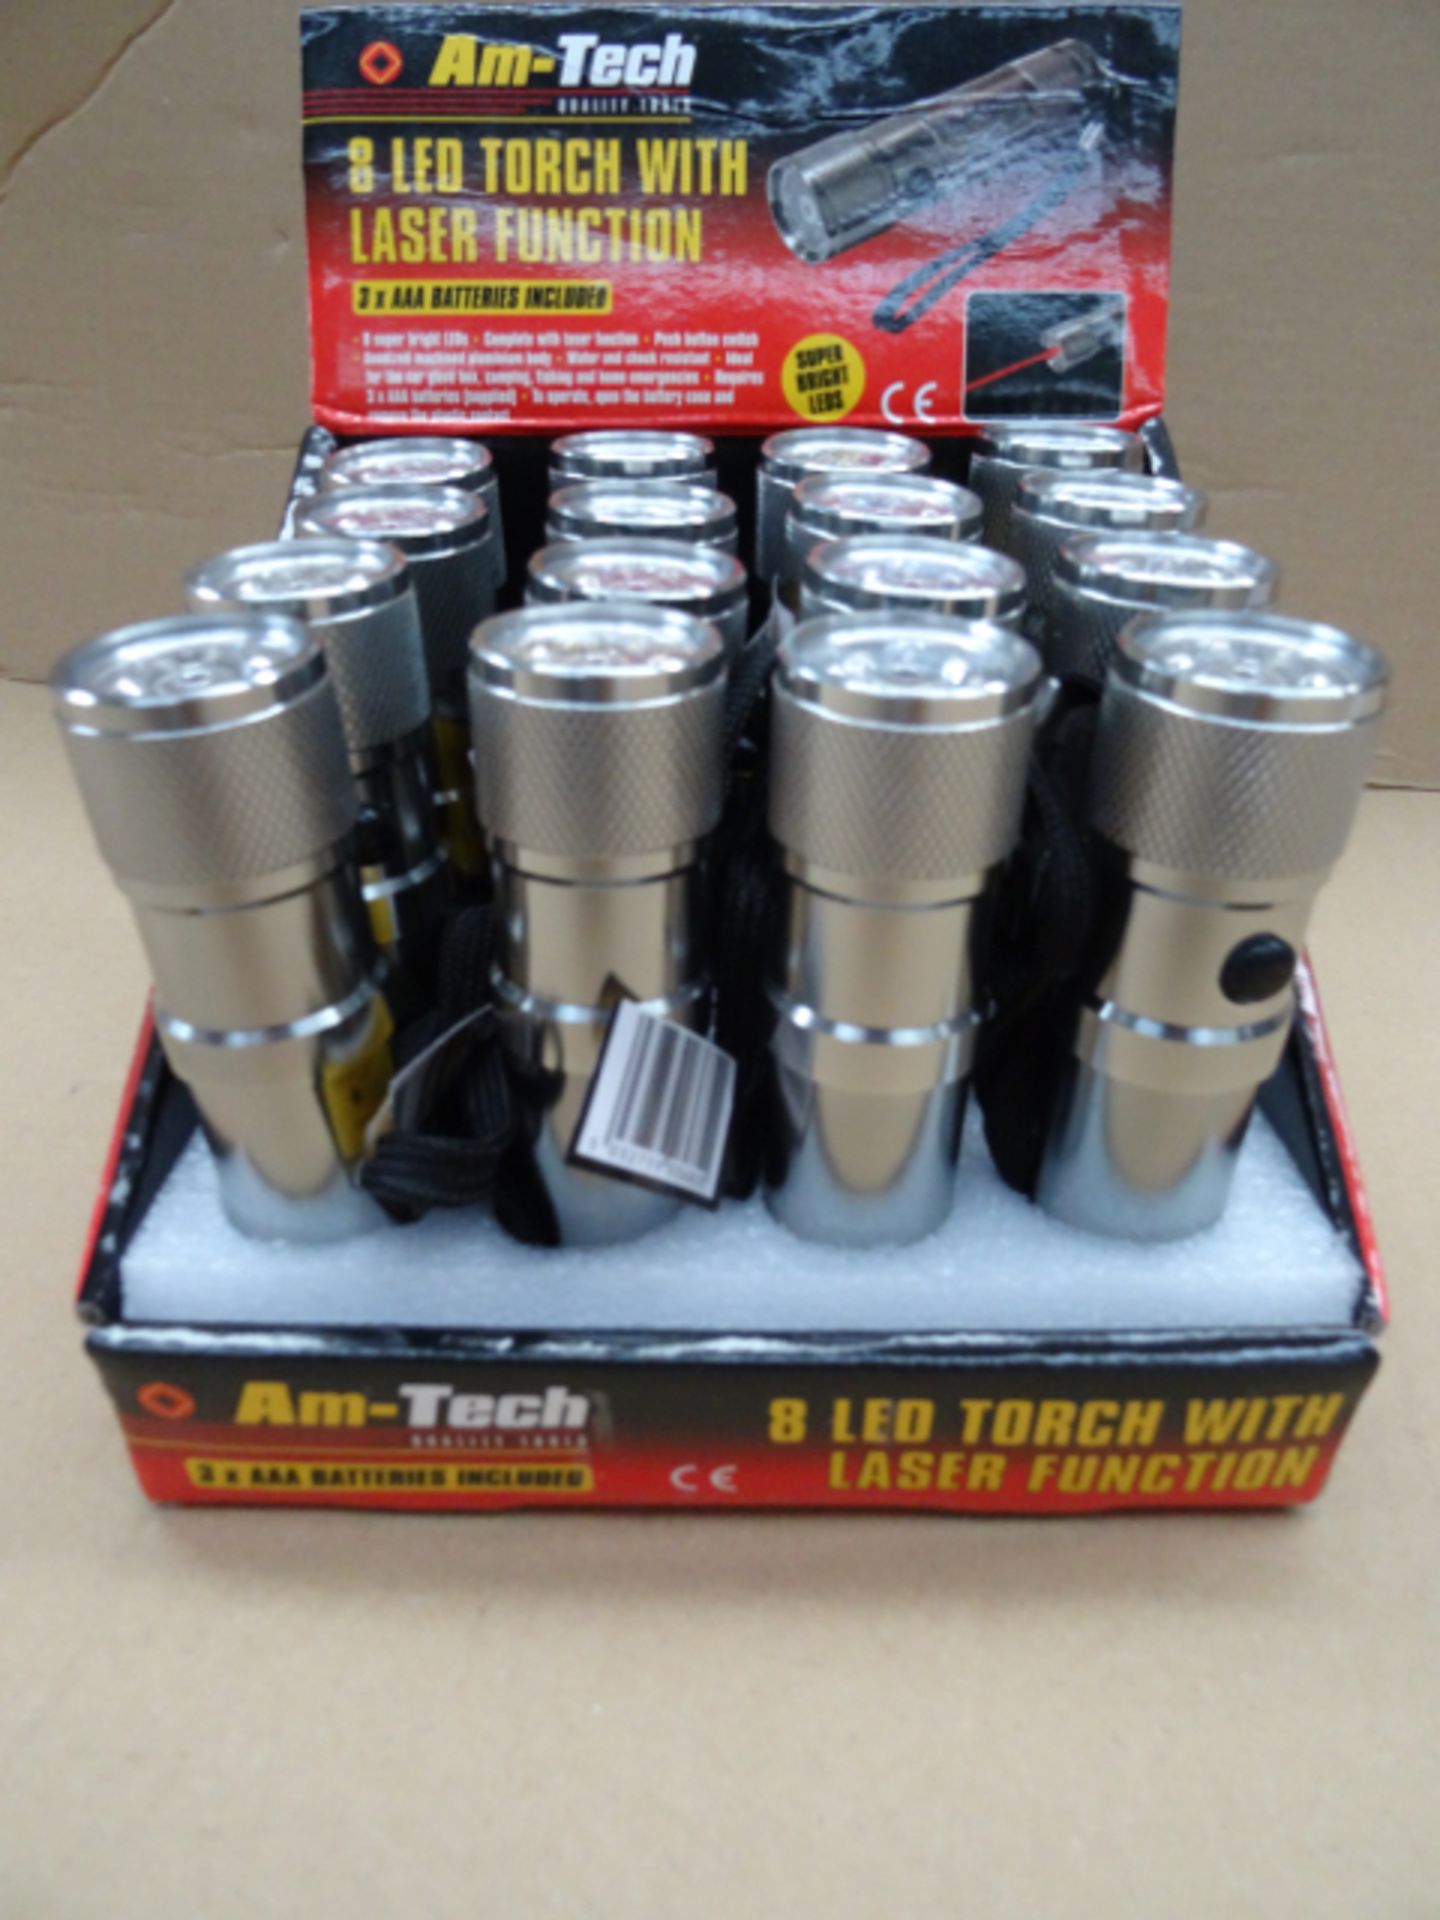 96 x Am-Tech Quality Tools. 8 LED Torch With Laser Function. 8 Super Bright LEDs. Complete with